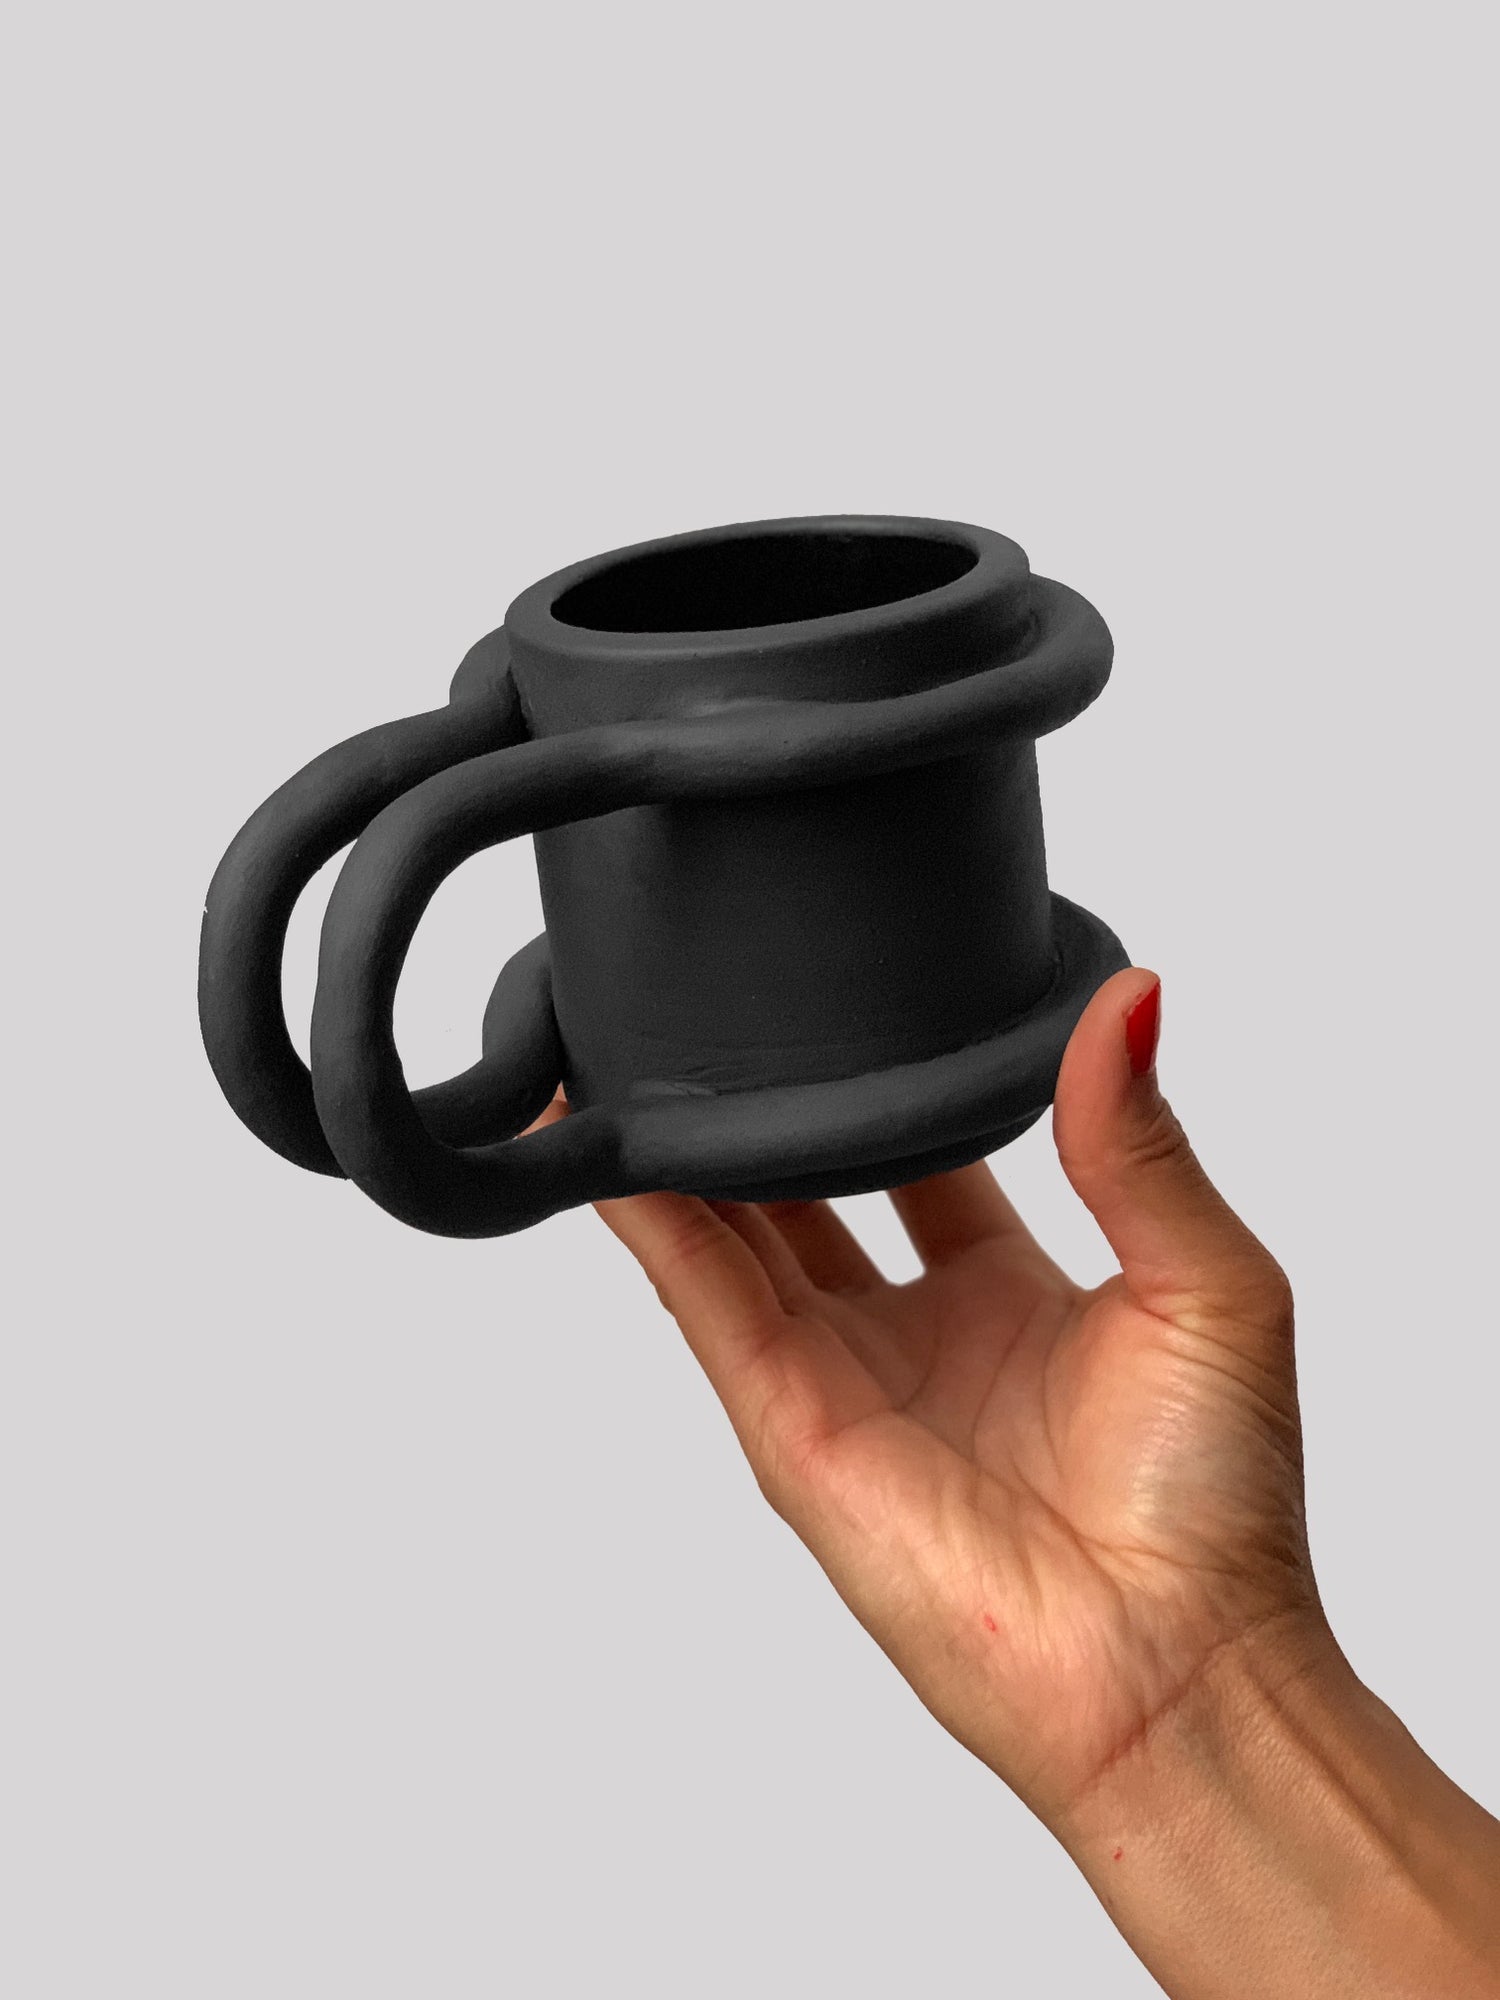 Black matte stoneware ceramic mug with two bar wrapping around each side of the mug and extending outwards as the handle.